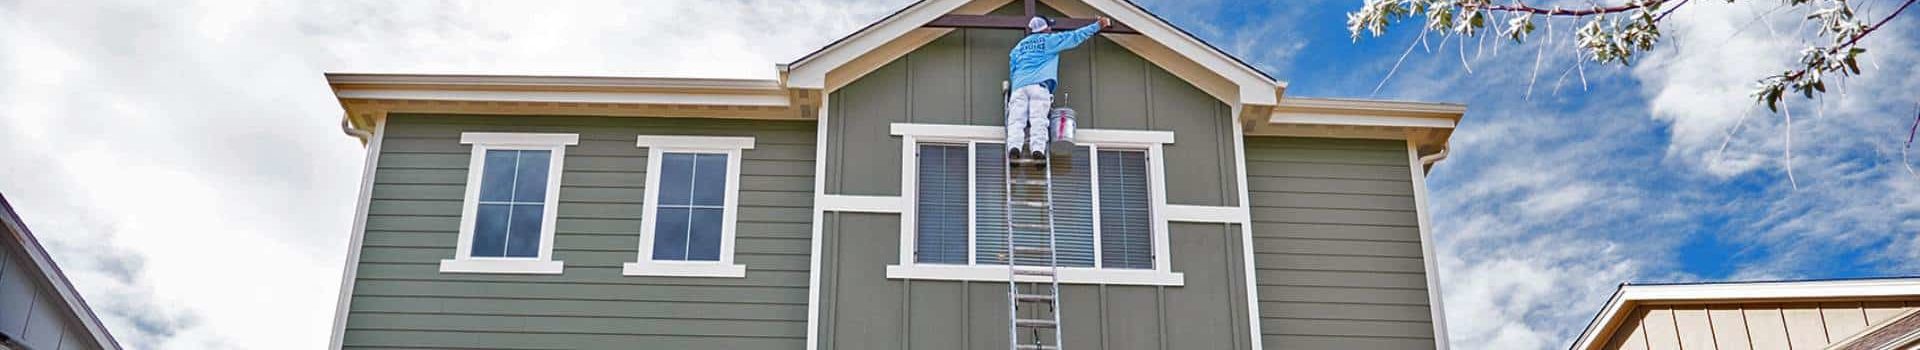 photo of Kind Home painter up on a ladder painting